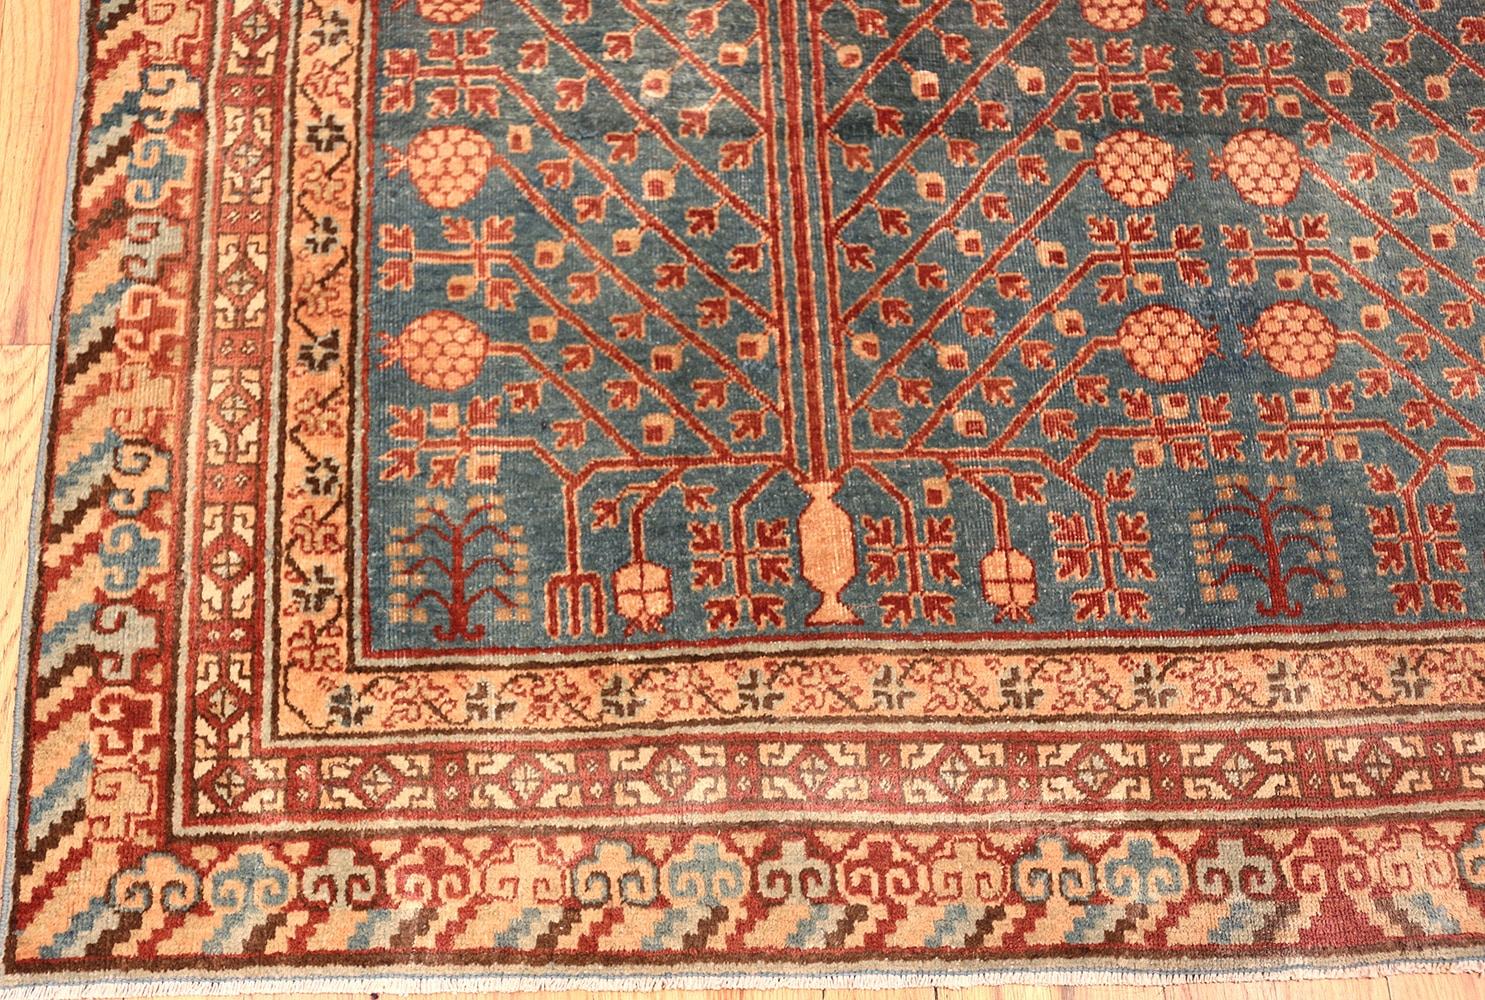 Hand-Knotted Tribal Blue Grey Antique Pomegranate Khotan Rug. Size: 6 ft 2 in x 13 ft